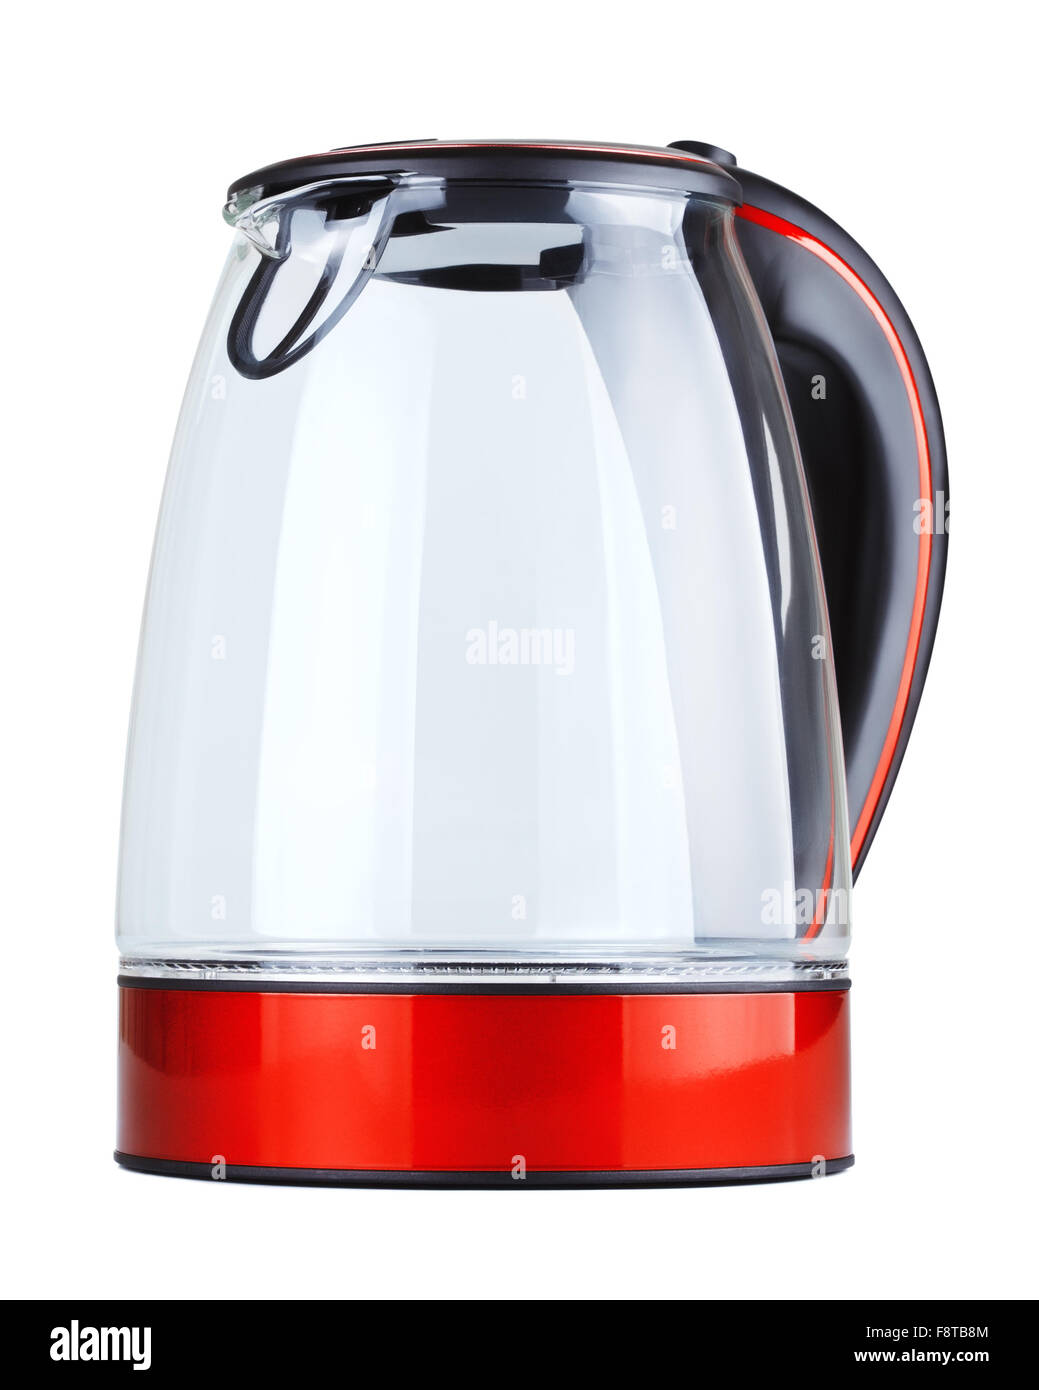 https://c8.alamy.com/comp/F8TB8M/glass-electric-kettle-isolated-on-white-background-F8TB8M.jpg